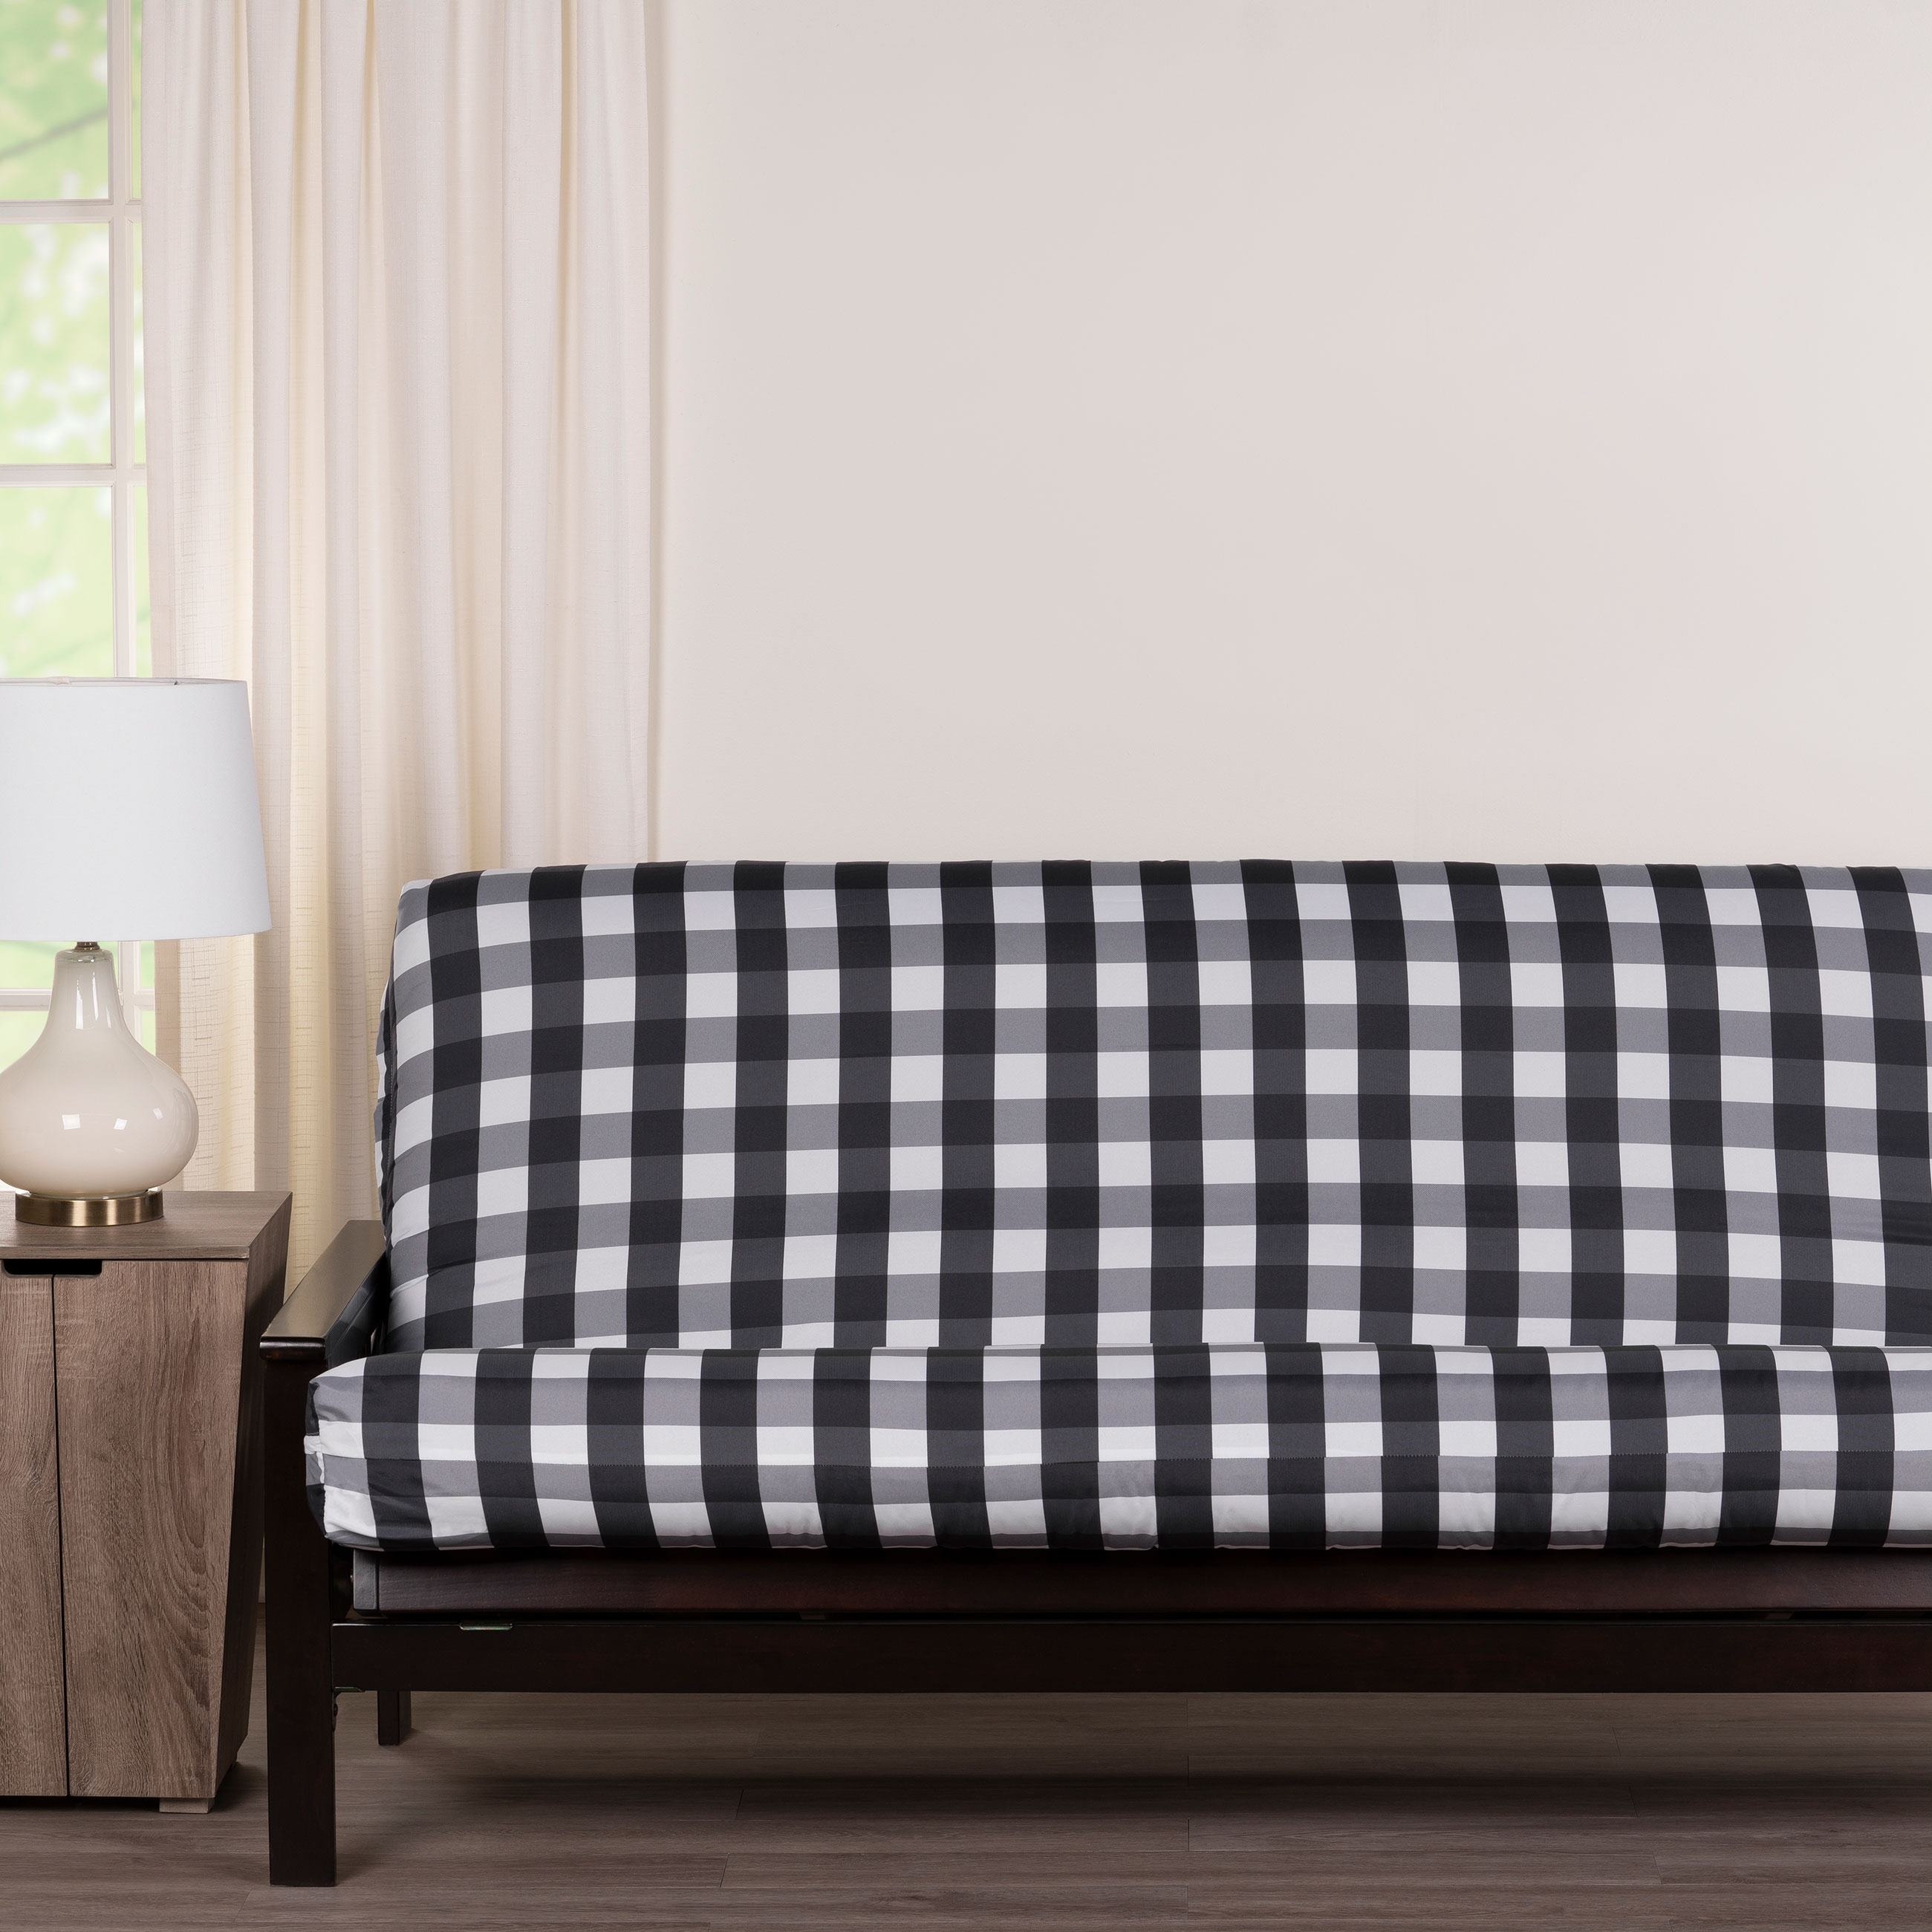 https://ak1.ostkcdn.com/images/products/is/images/direct/a3577094c7e4d4d8f6685b07e26c5044fb1e83cb/Buffalo-Plaid-Black-Full-Size-Futon-Cover.jpg